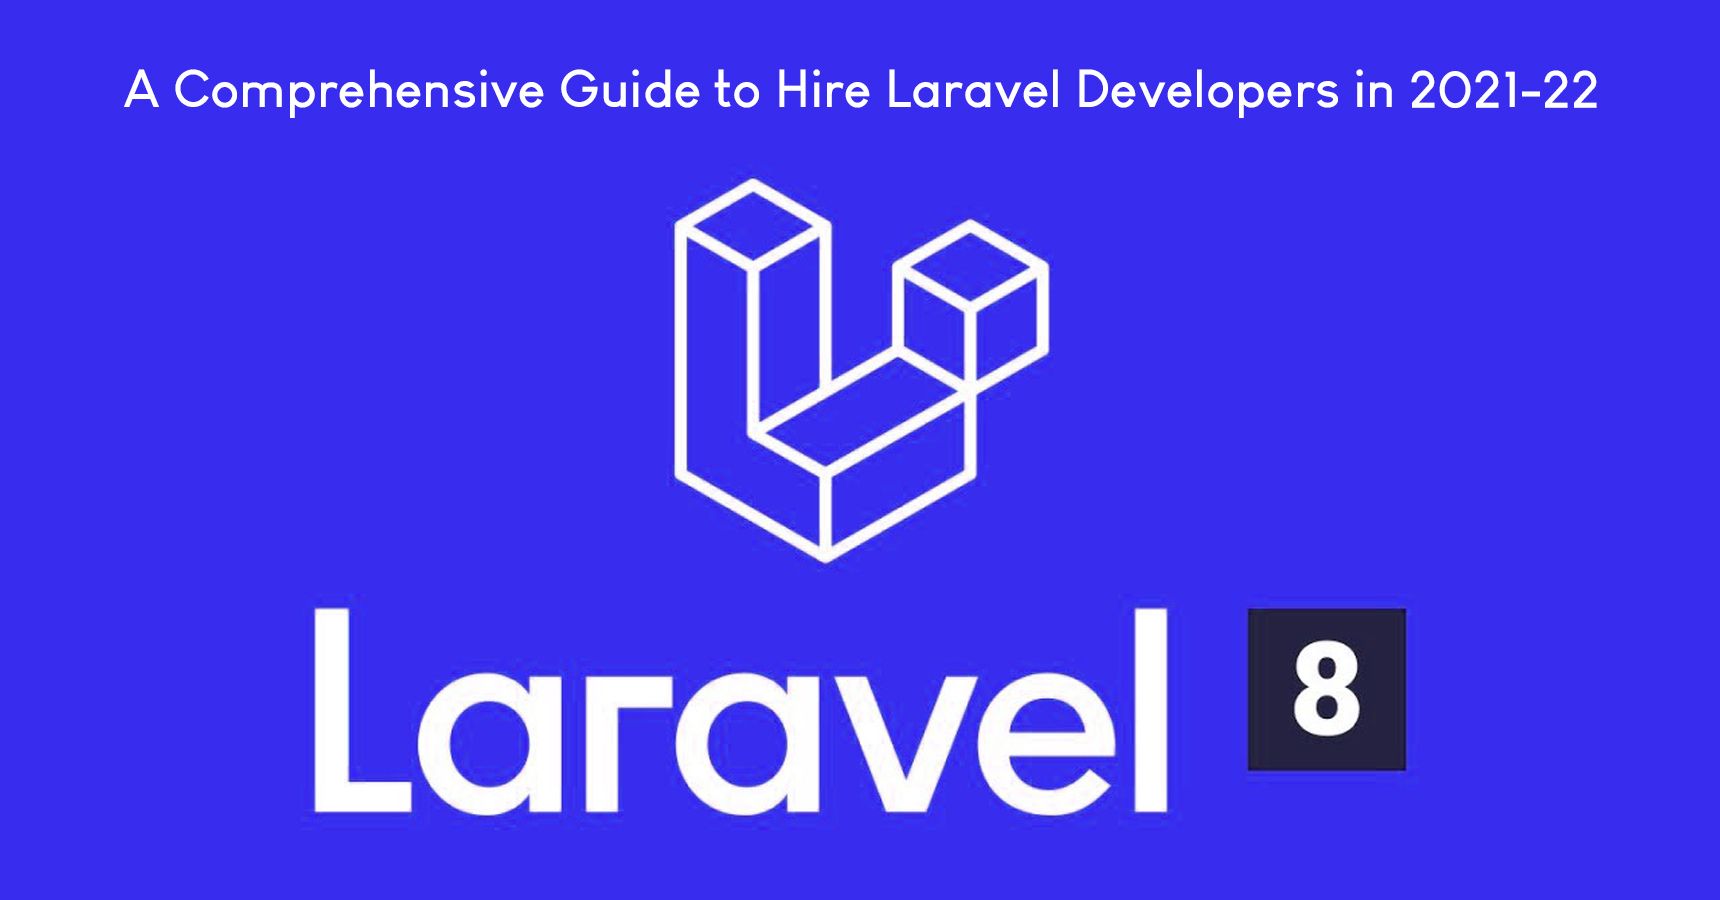 A Comprehensive Guide to Hire Laravel Developers in 2021-22